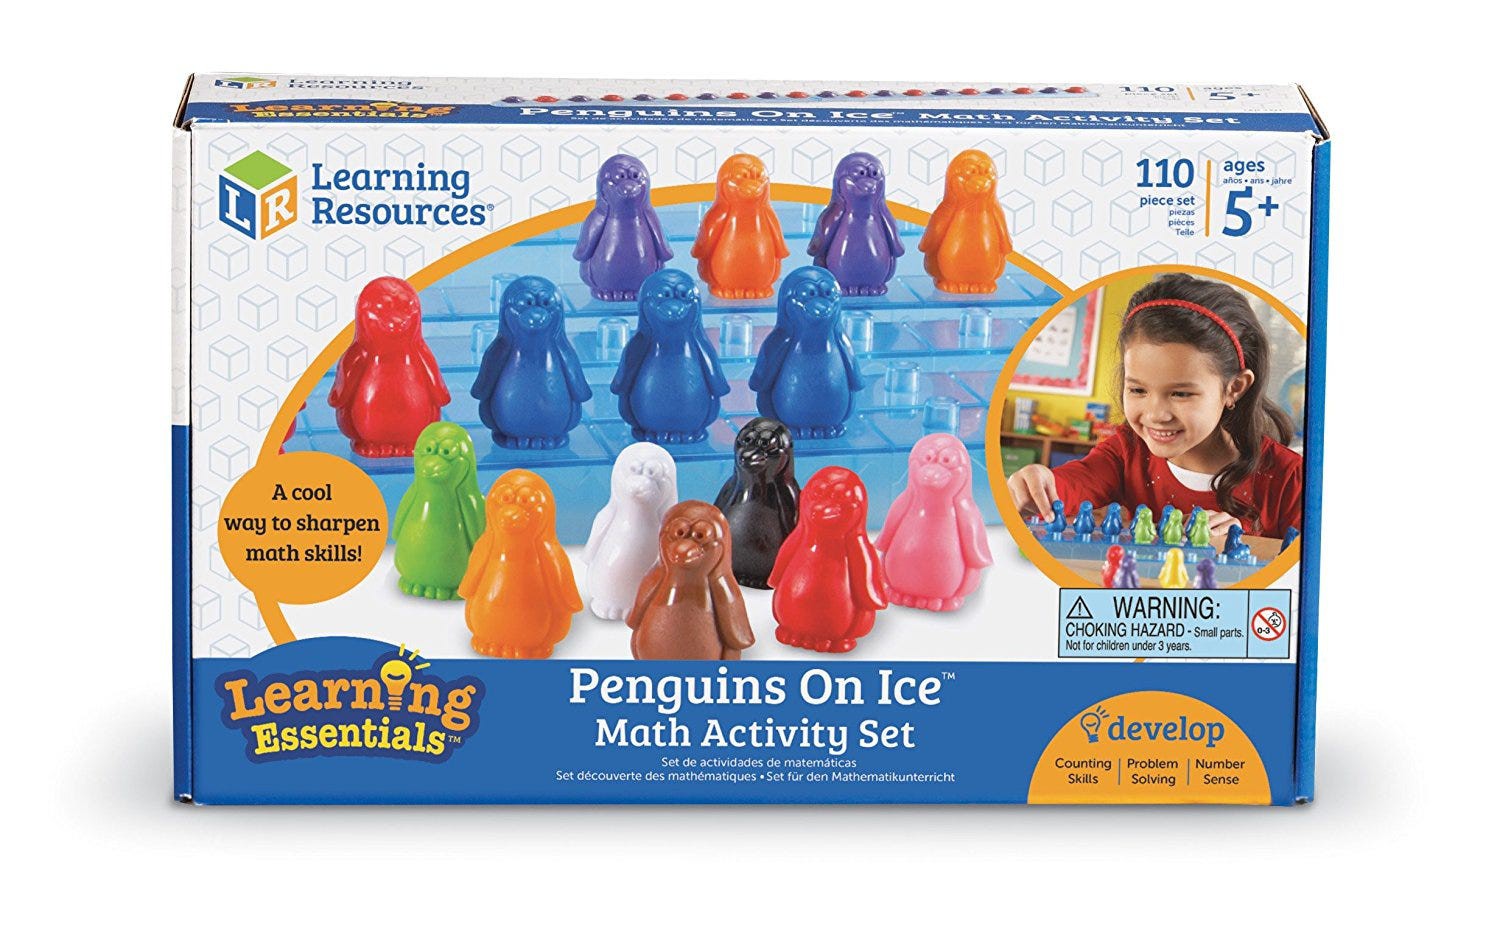 Penguins on Ice Math Activity Set - Learning Resources